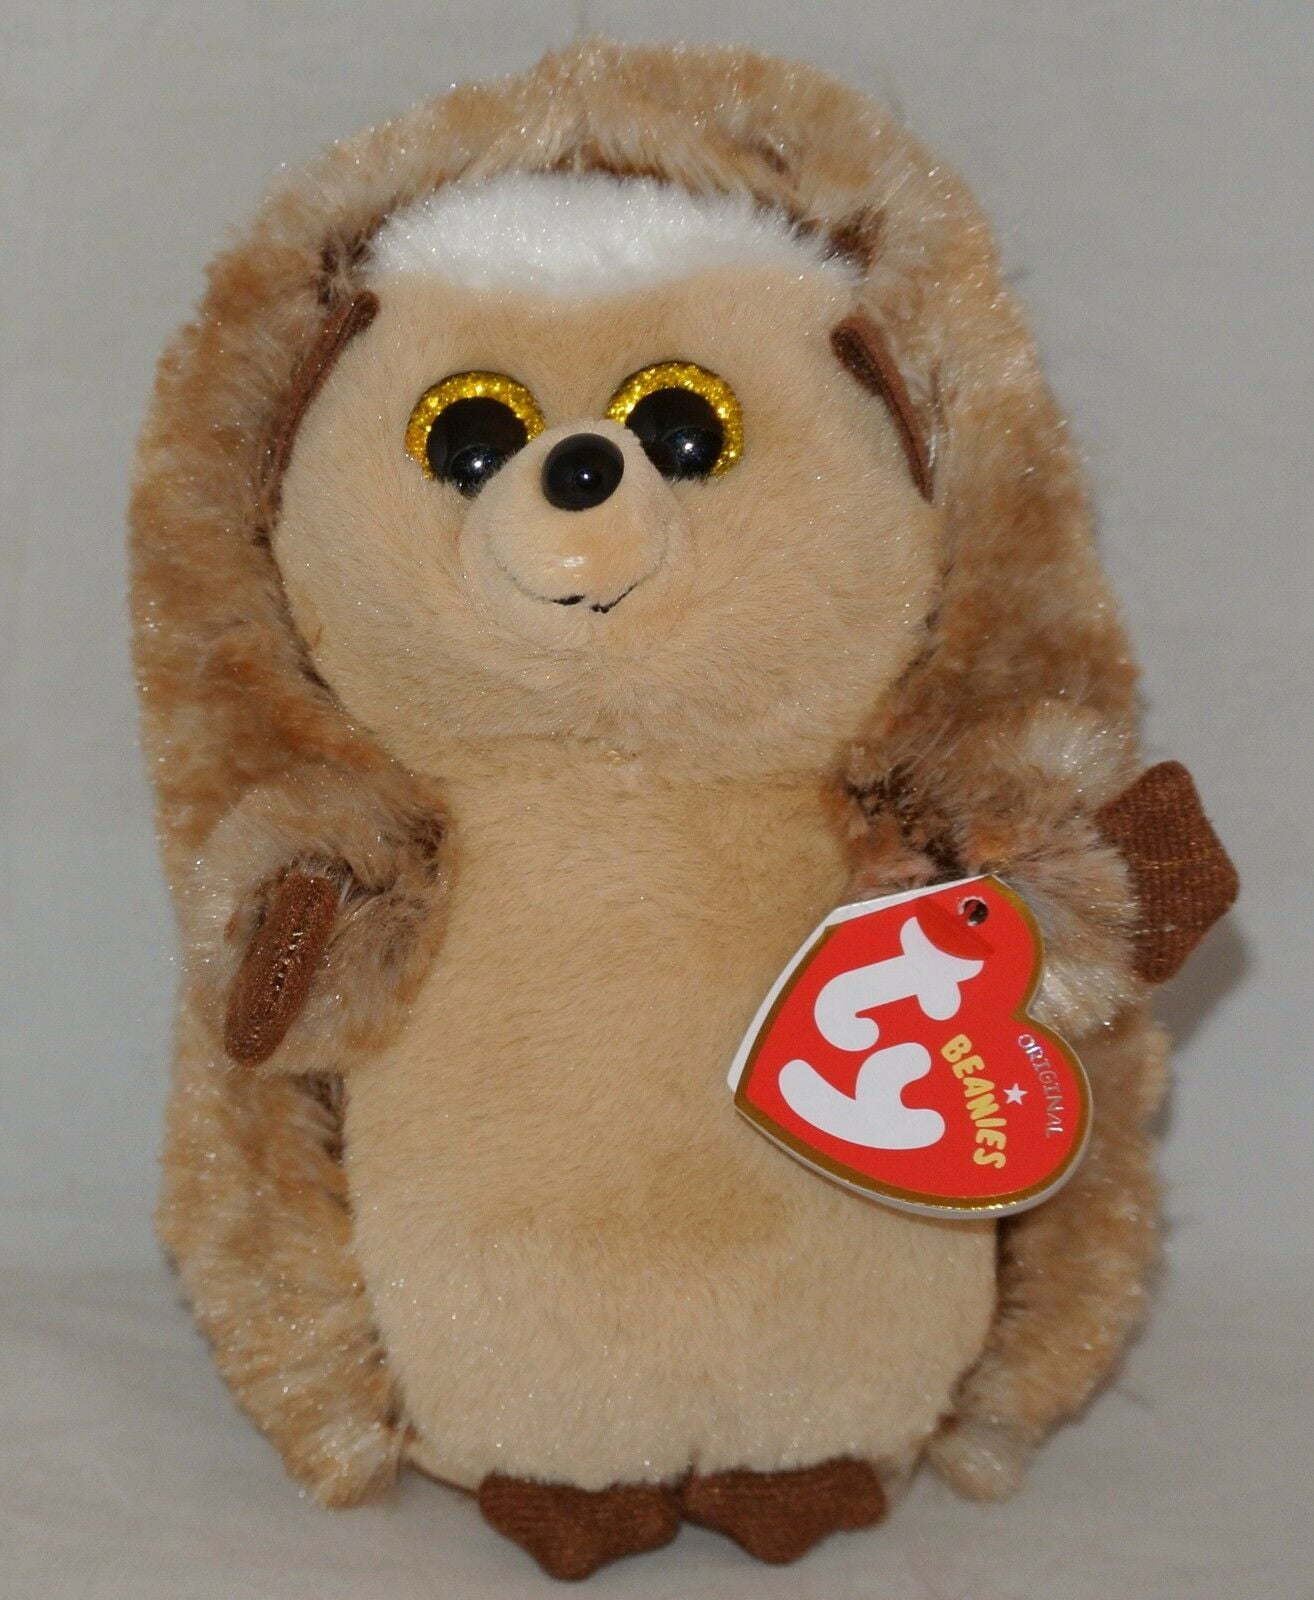 Ty Beanie Babies Ida The Hedgehog 6" 2018 Release for sale online 